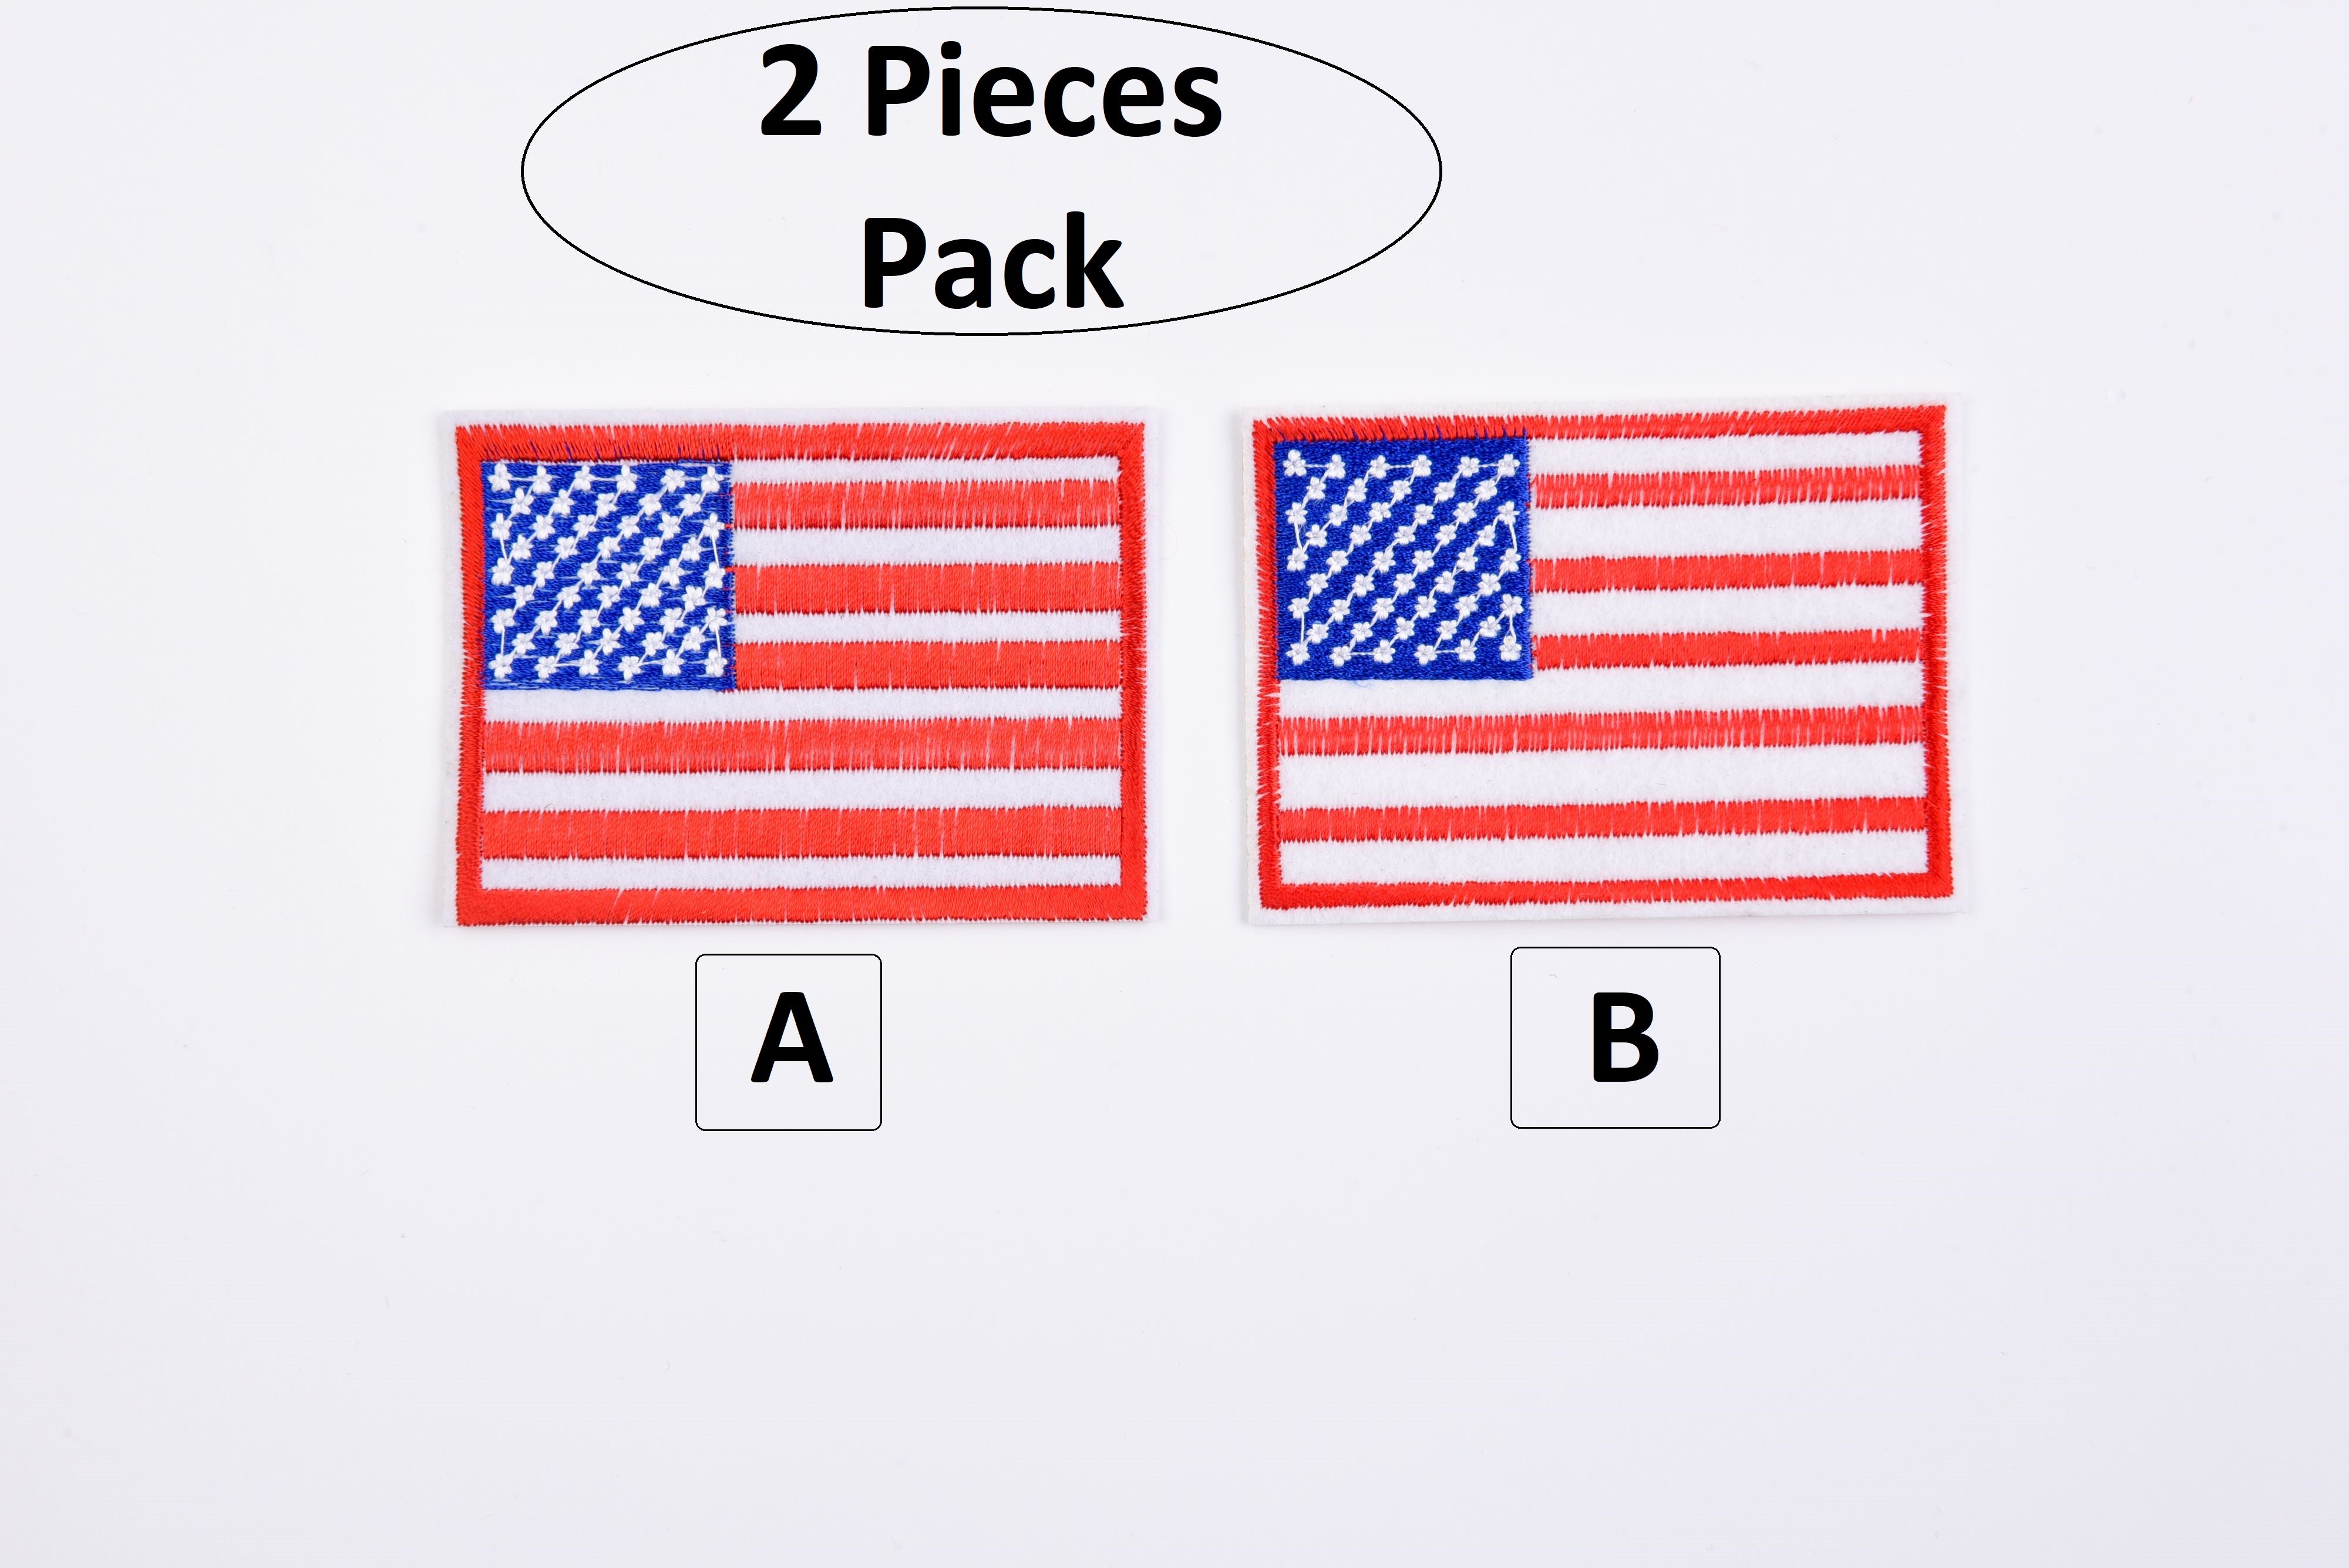 Black American Flag Patches (2-Pack) Iron On USA Patch Set of United States  of America Flag, US Flag Patch, sew on for Hats, Clothing, Backpacks, and